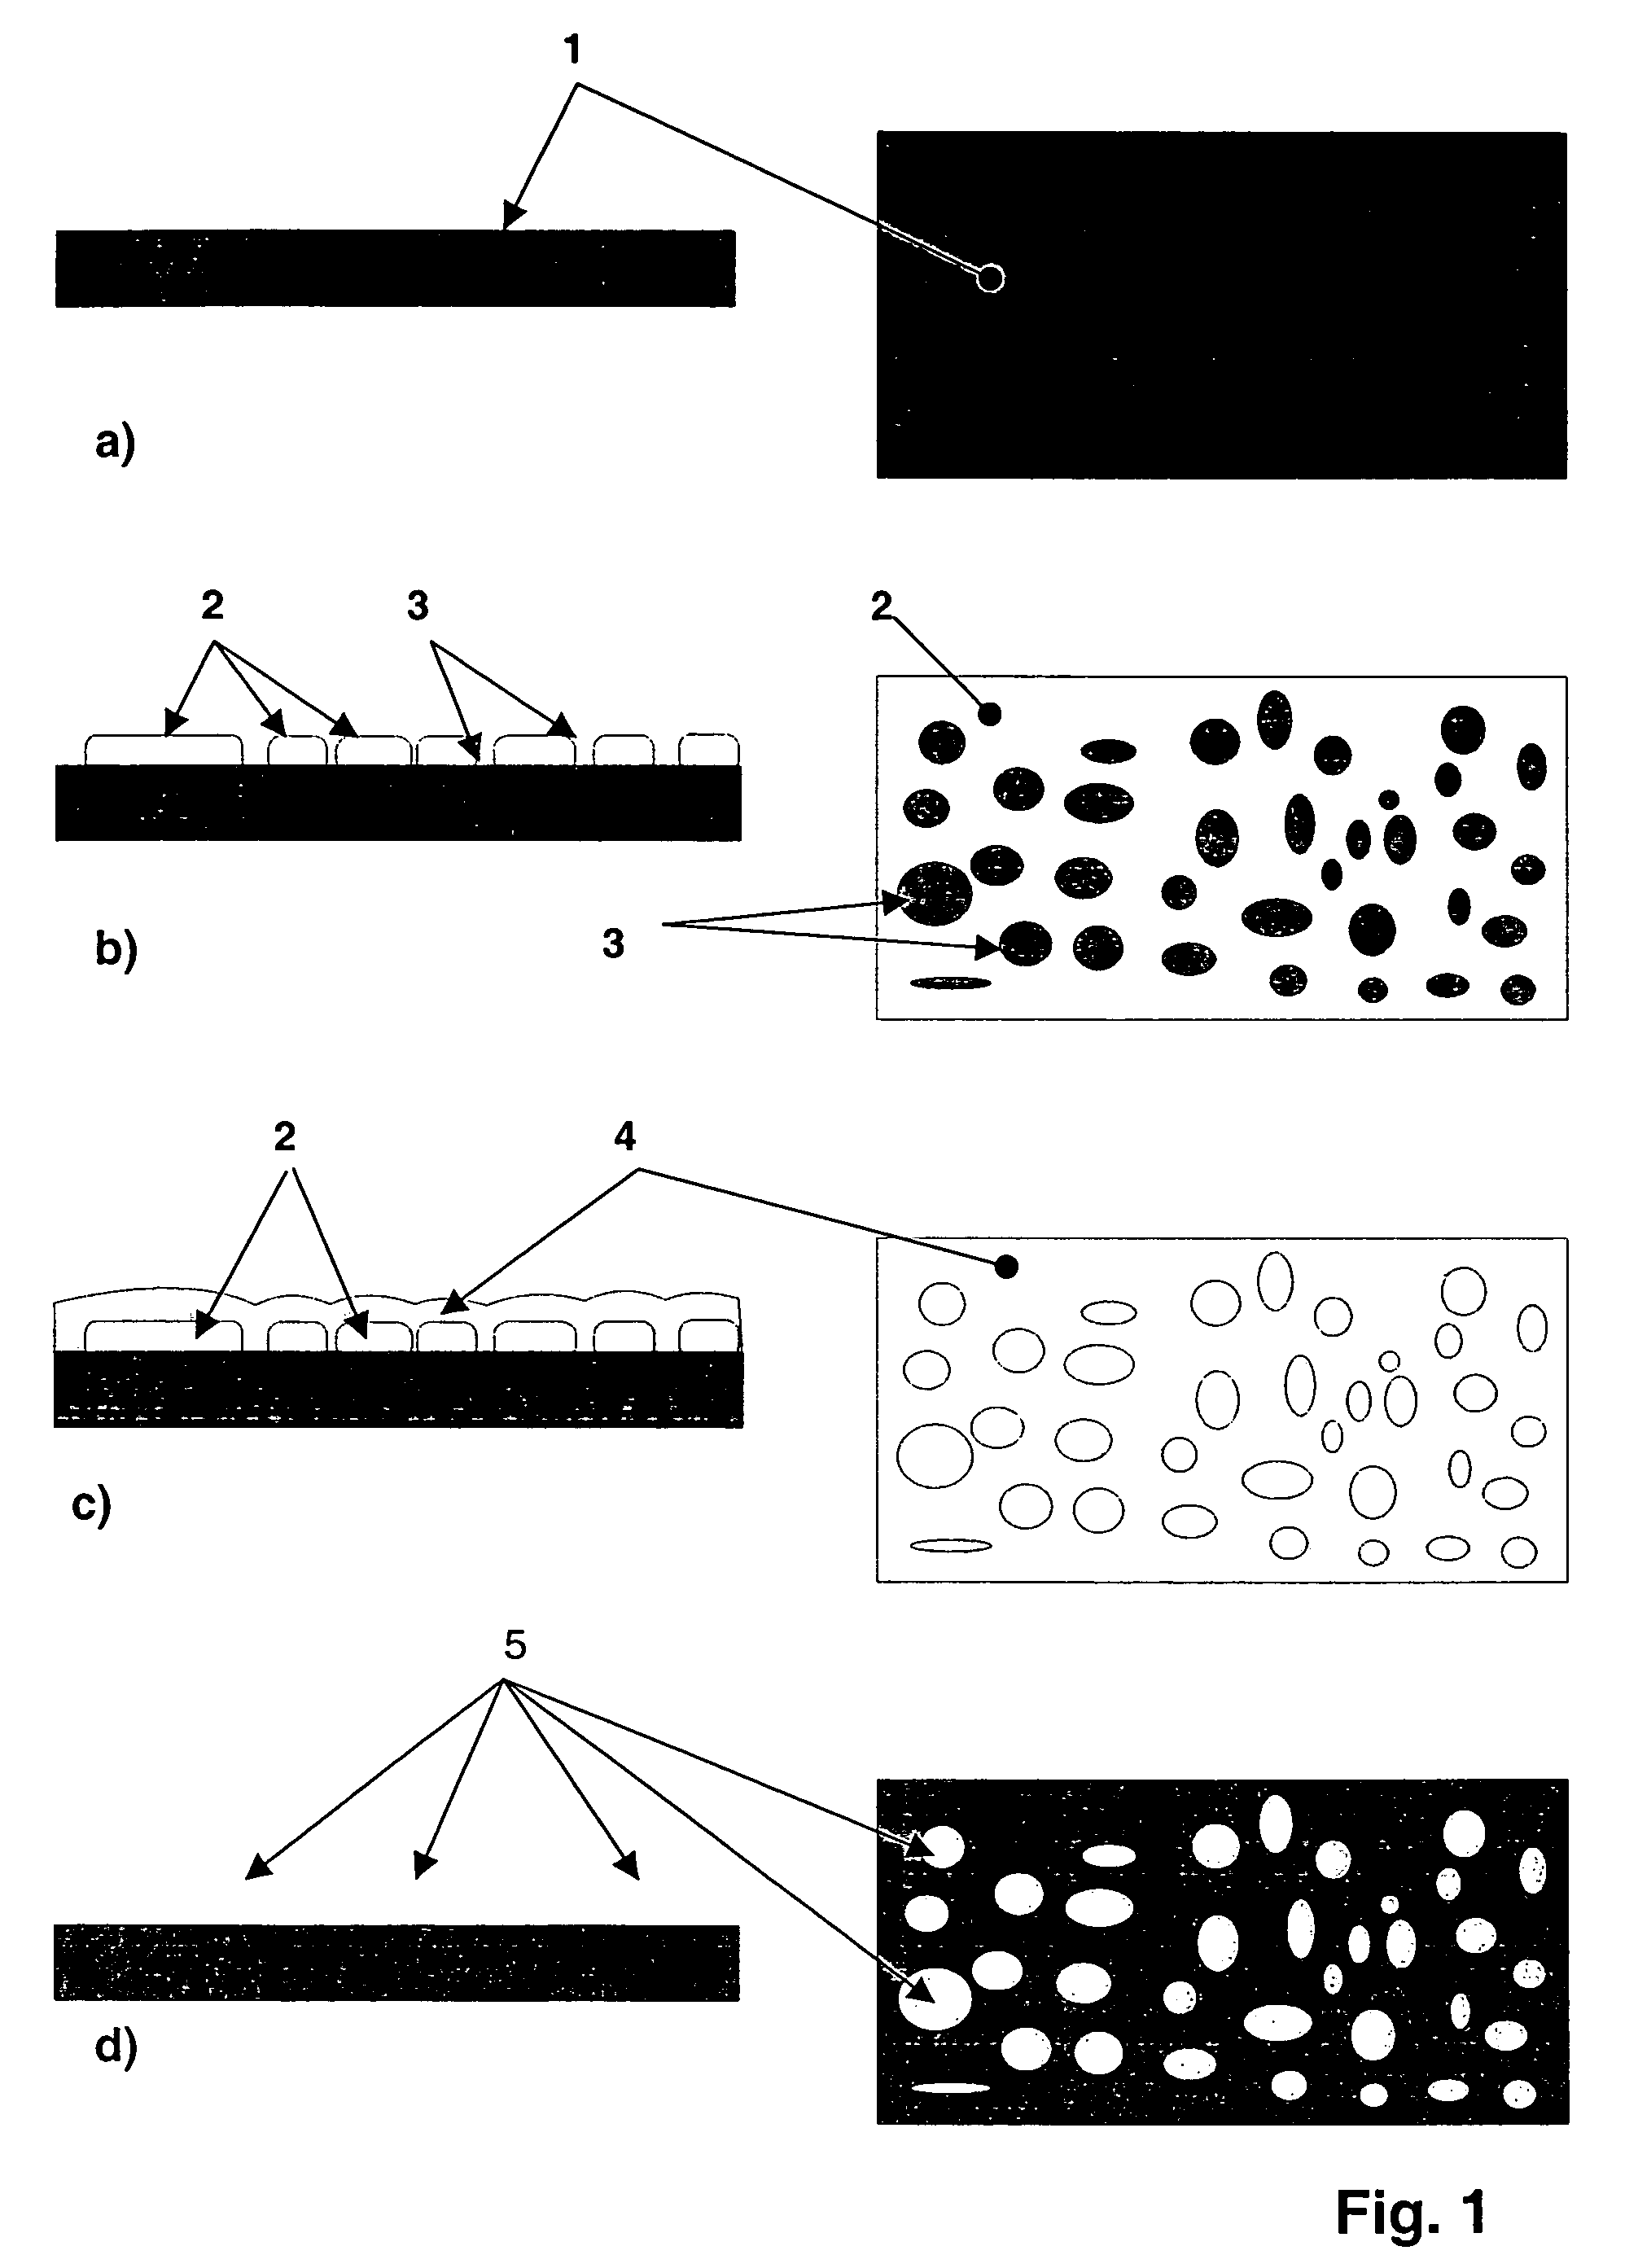 Method for producing a tool which can be used to create surface structures in the sub-mum range